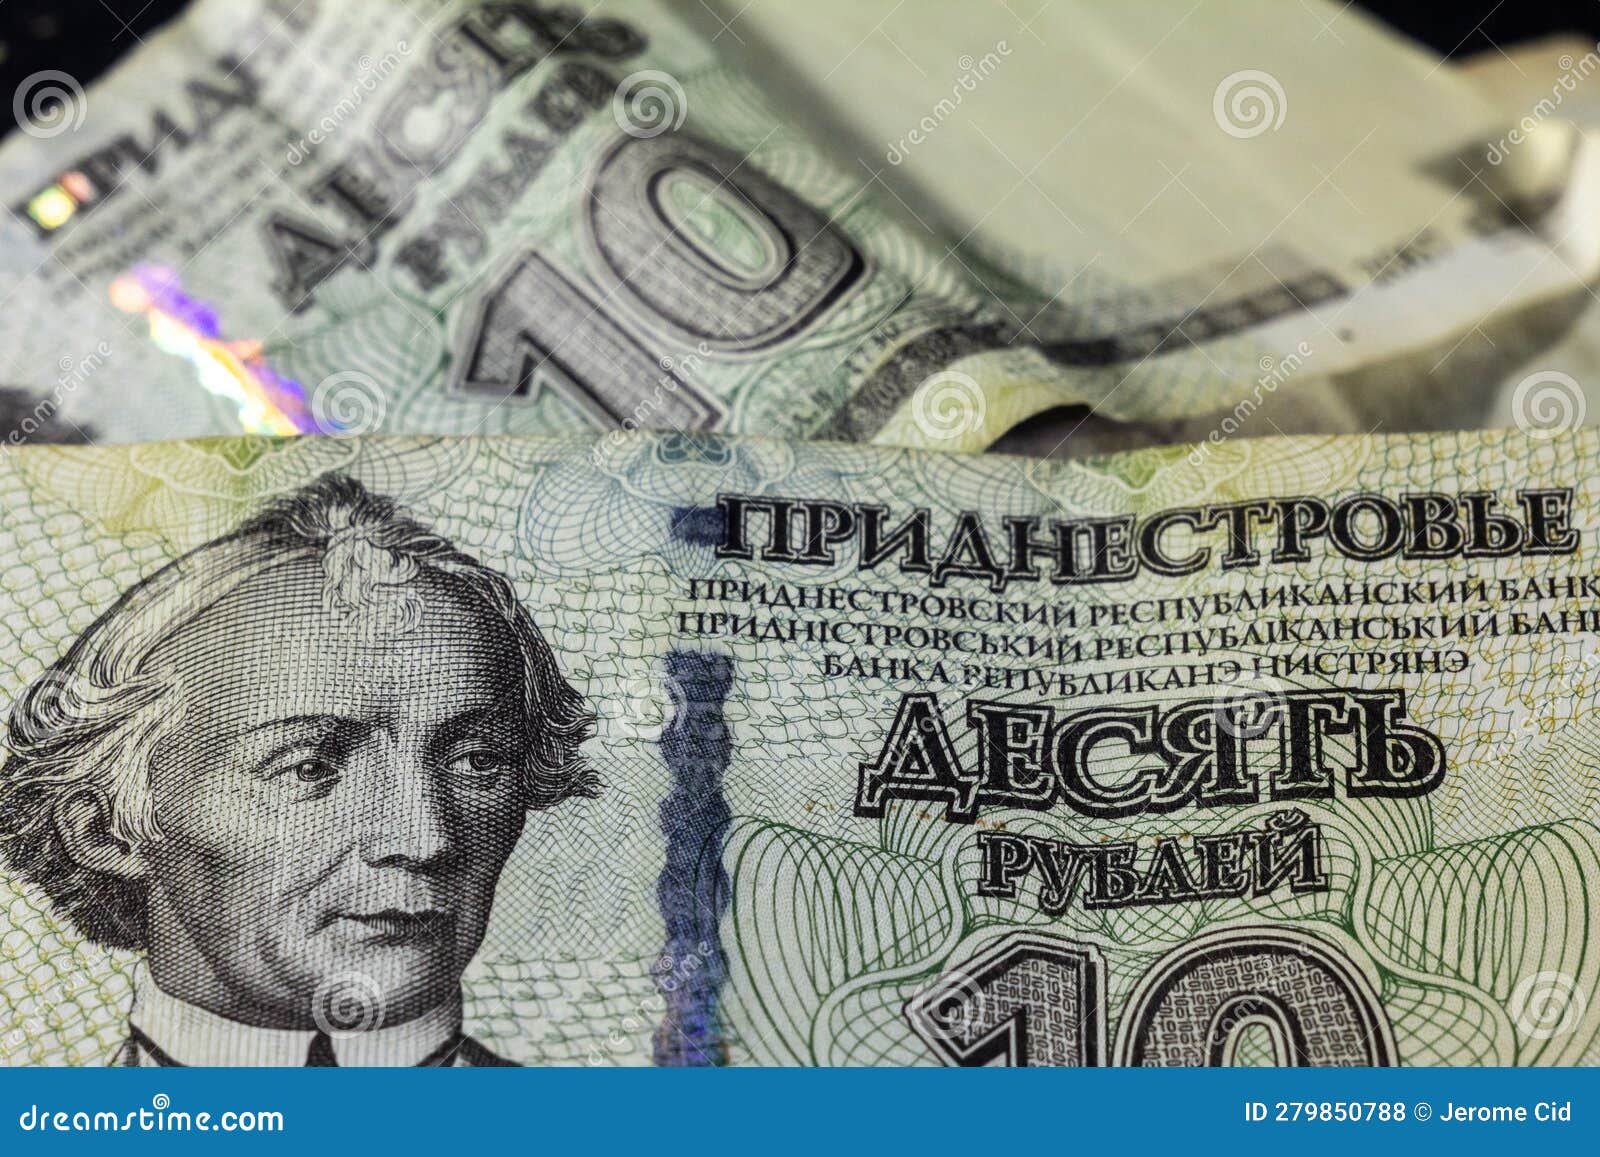 selective blur on banknotes of 10 transnistrian rubles. it is the official currency of the unrecognized state of transnistria